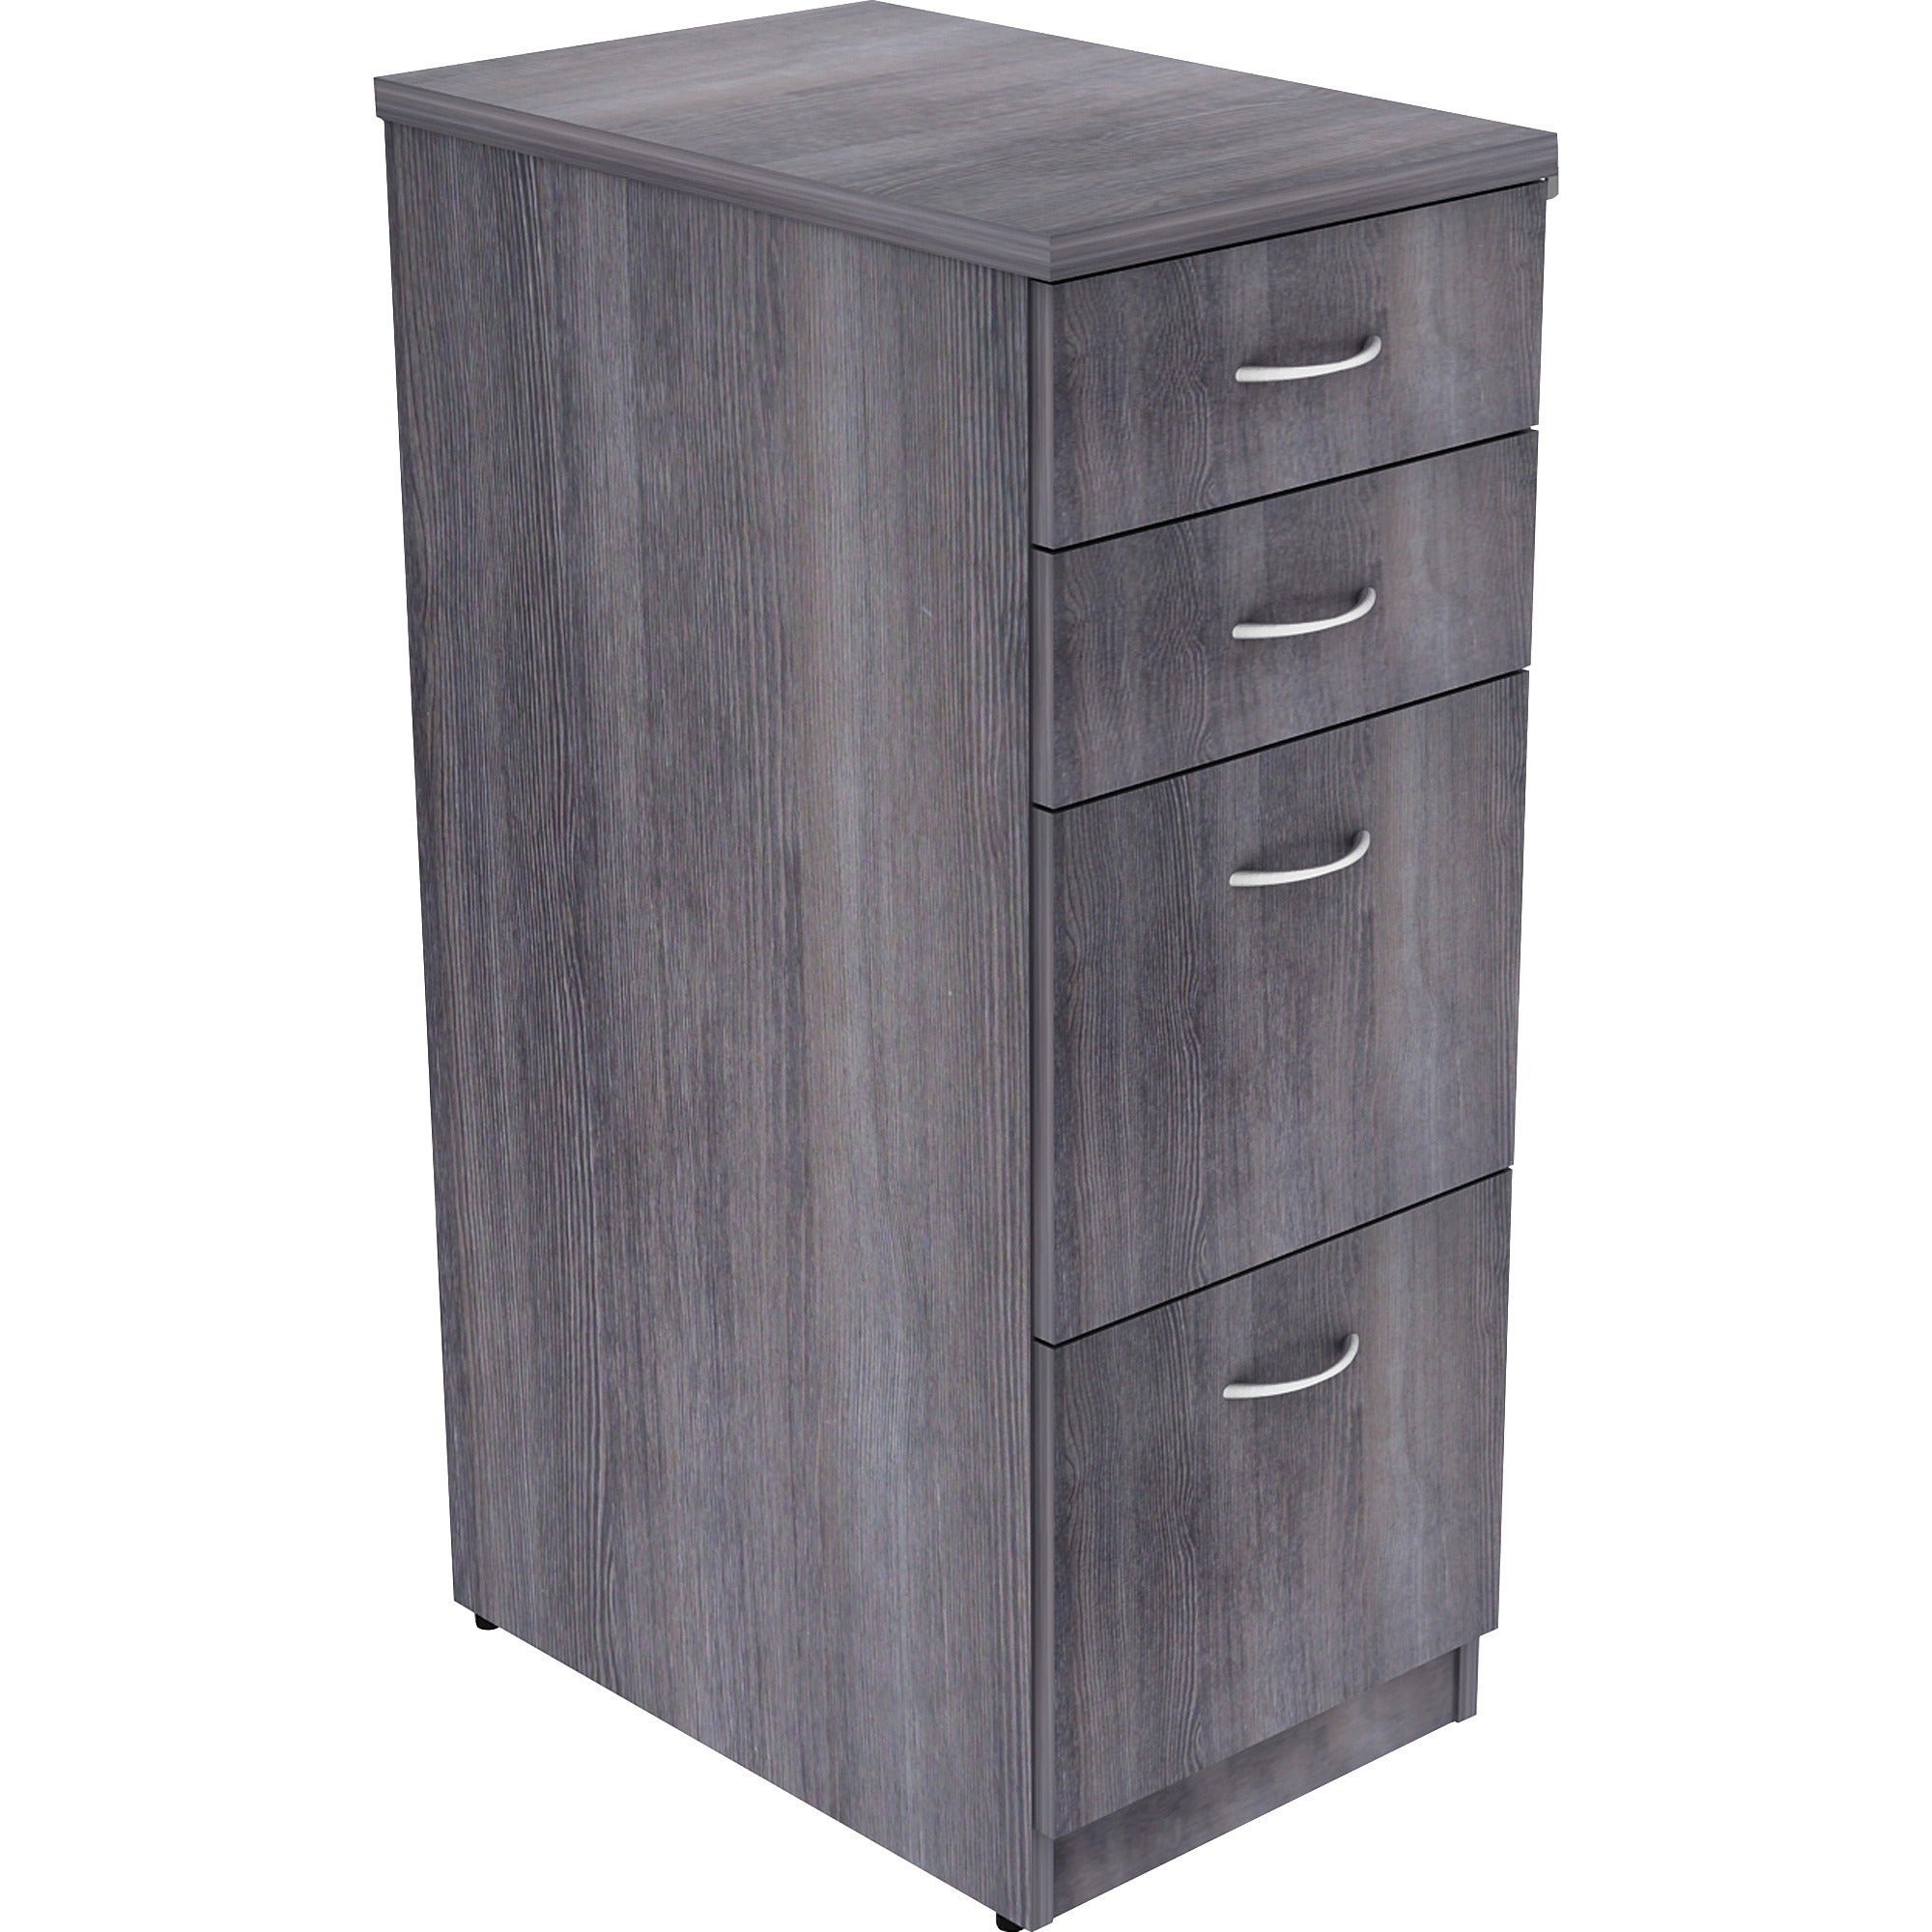 lorell-relevance-series-4-drawer-file-cabinet-155-x-236404-4-x-file-box-drawers-finish-charcoal-laminate_llr16211 - 1